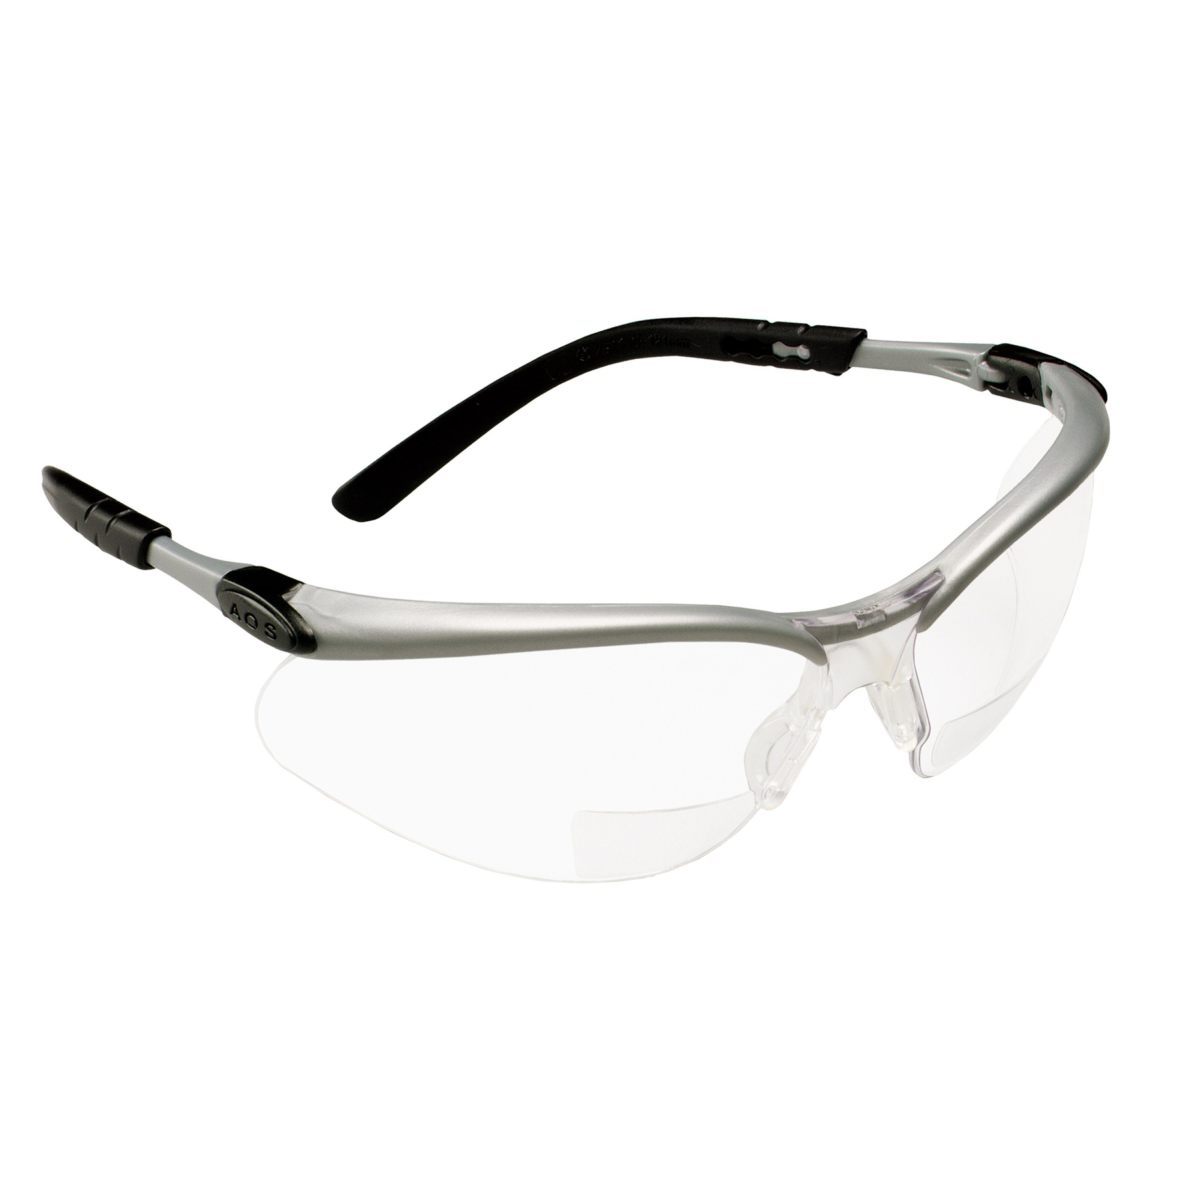 3M™ BX™ Reader Protective Eyewear 11375-00000-20 Clear Lens, Silver Frame, +2.0 Diopter (Availability restrictions apply.)